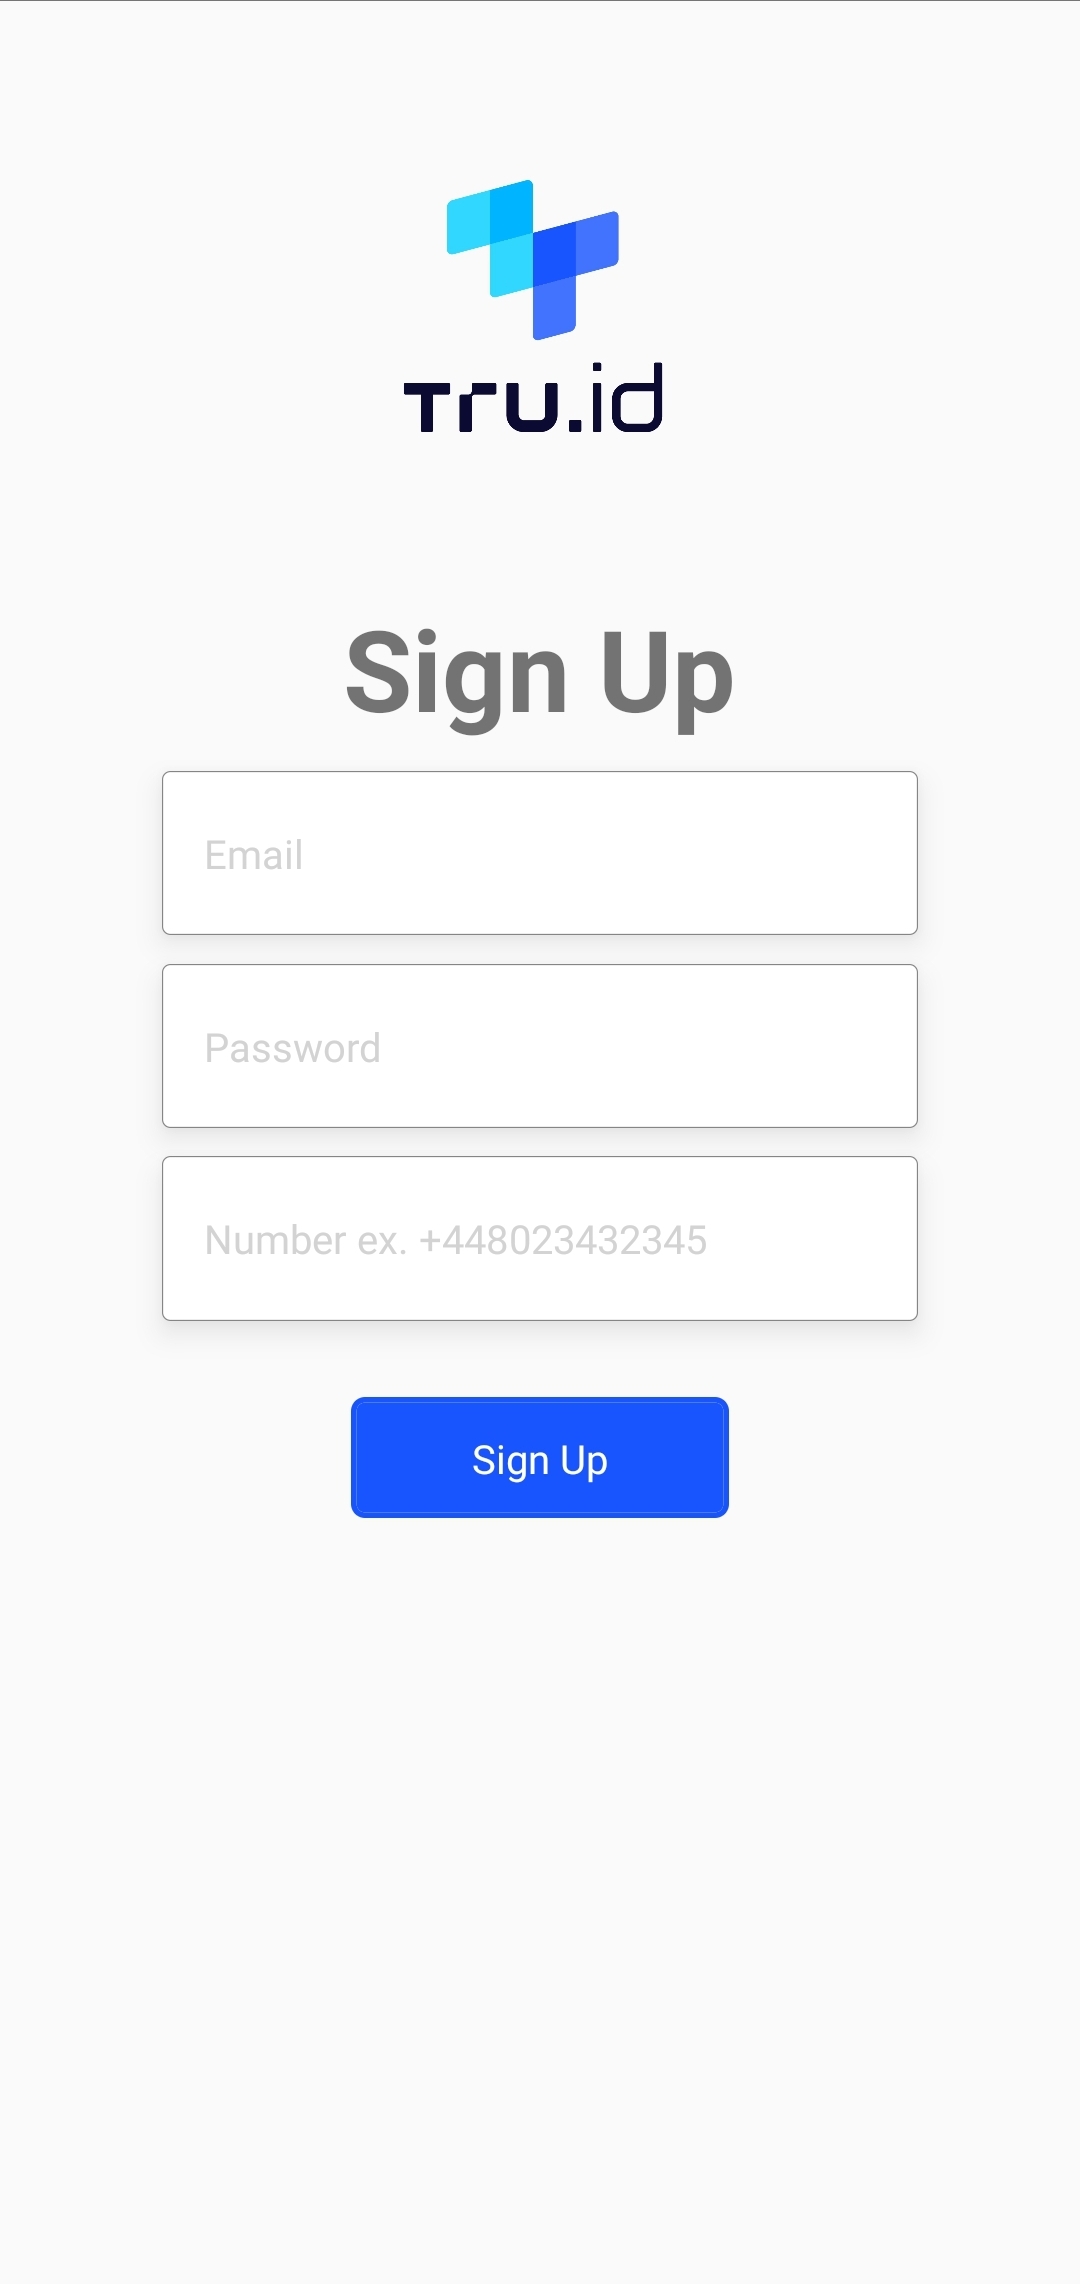 the tru.ID logo with a text that says 'Sign Up' with an email text input, a password text input, a phone number text input, and a button that says 'sign up'.